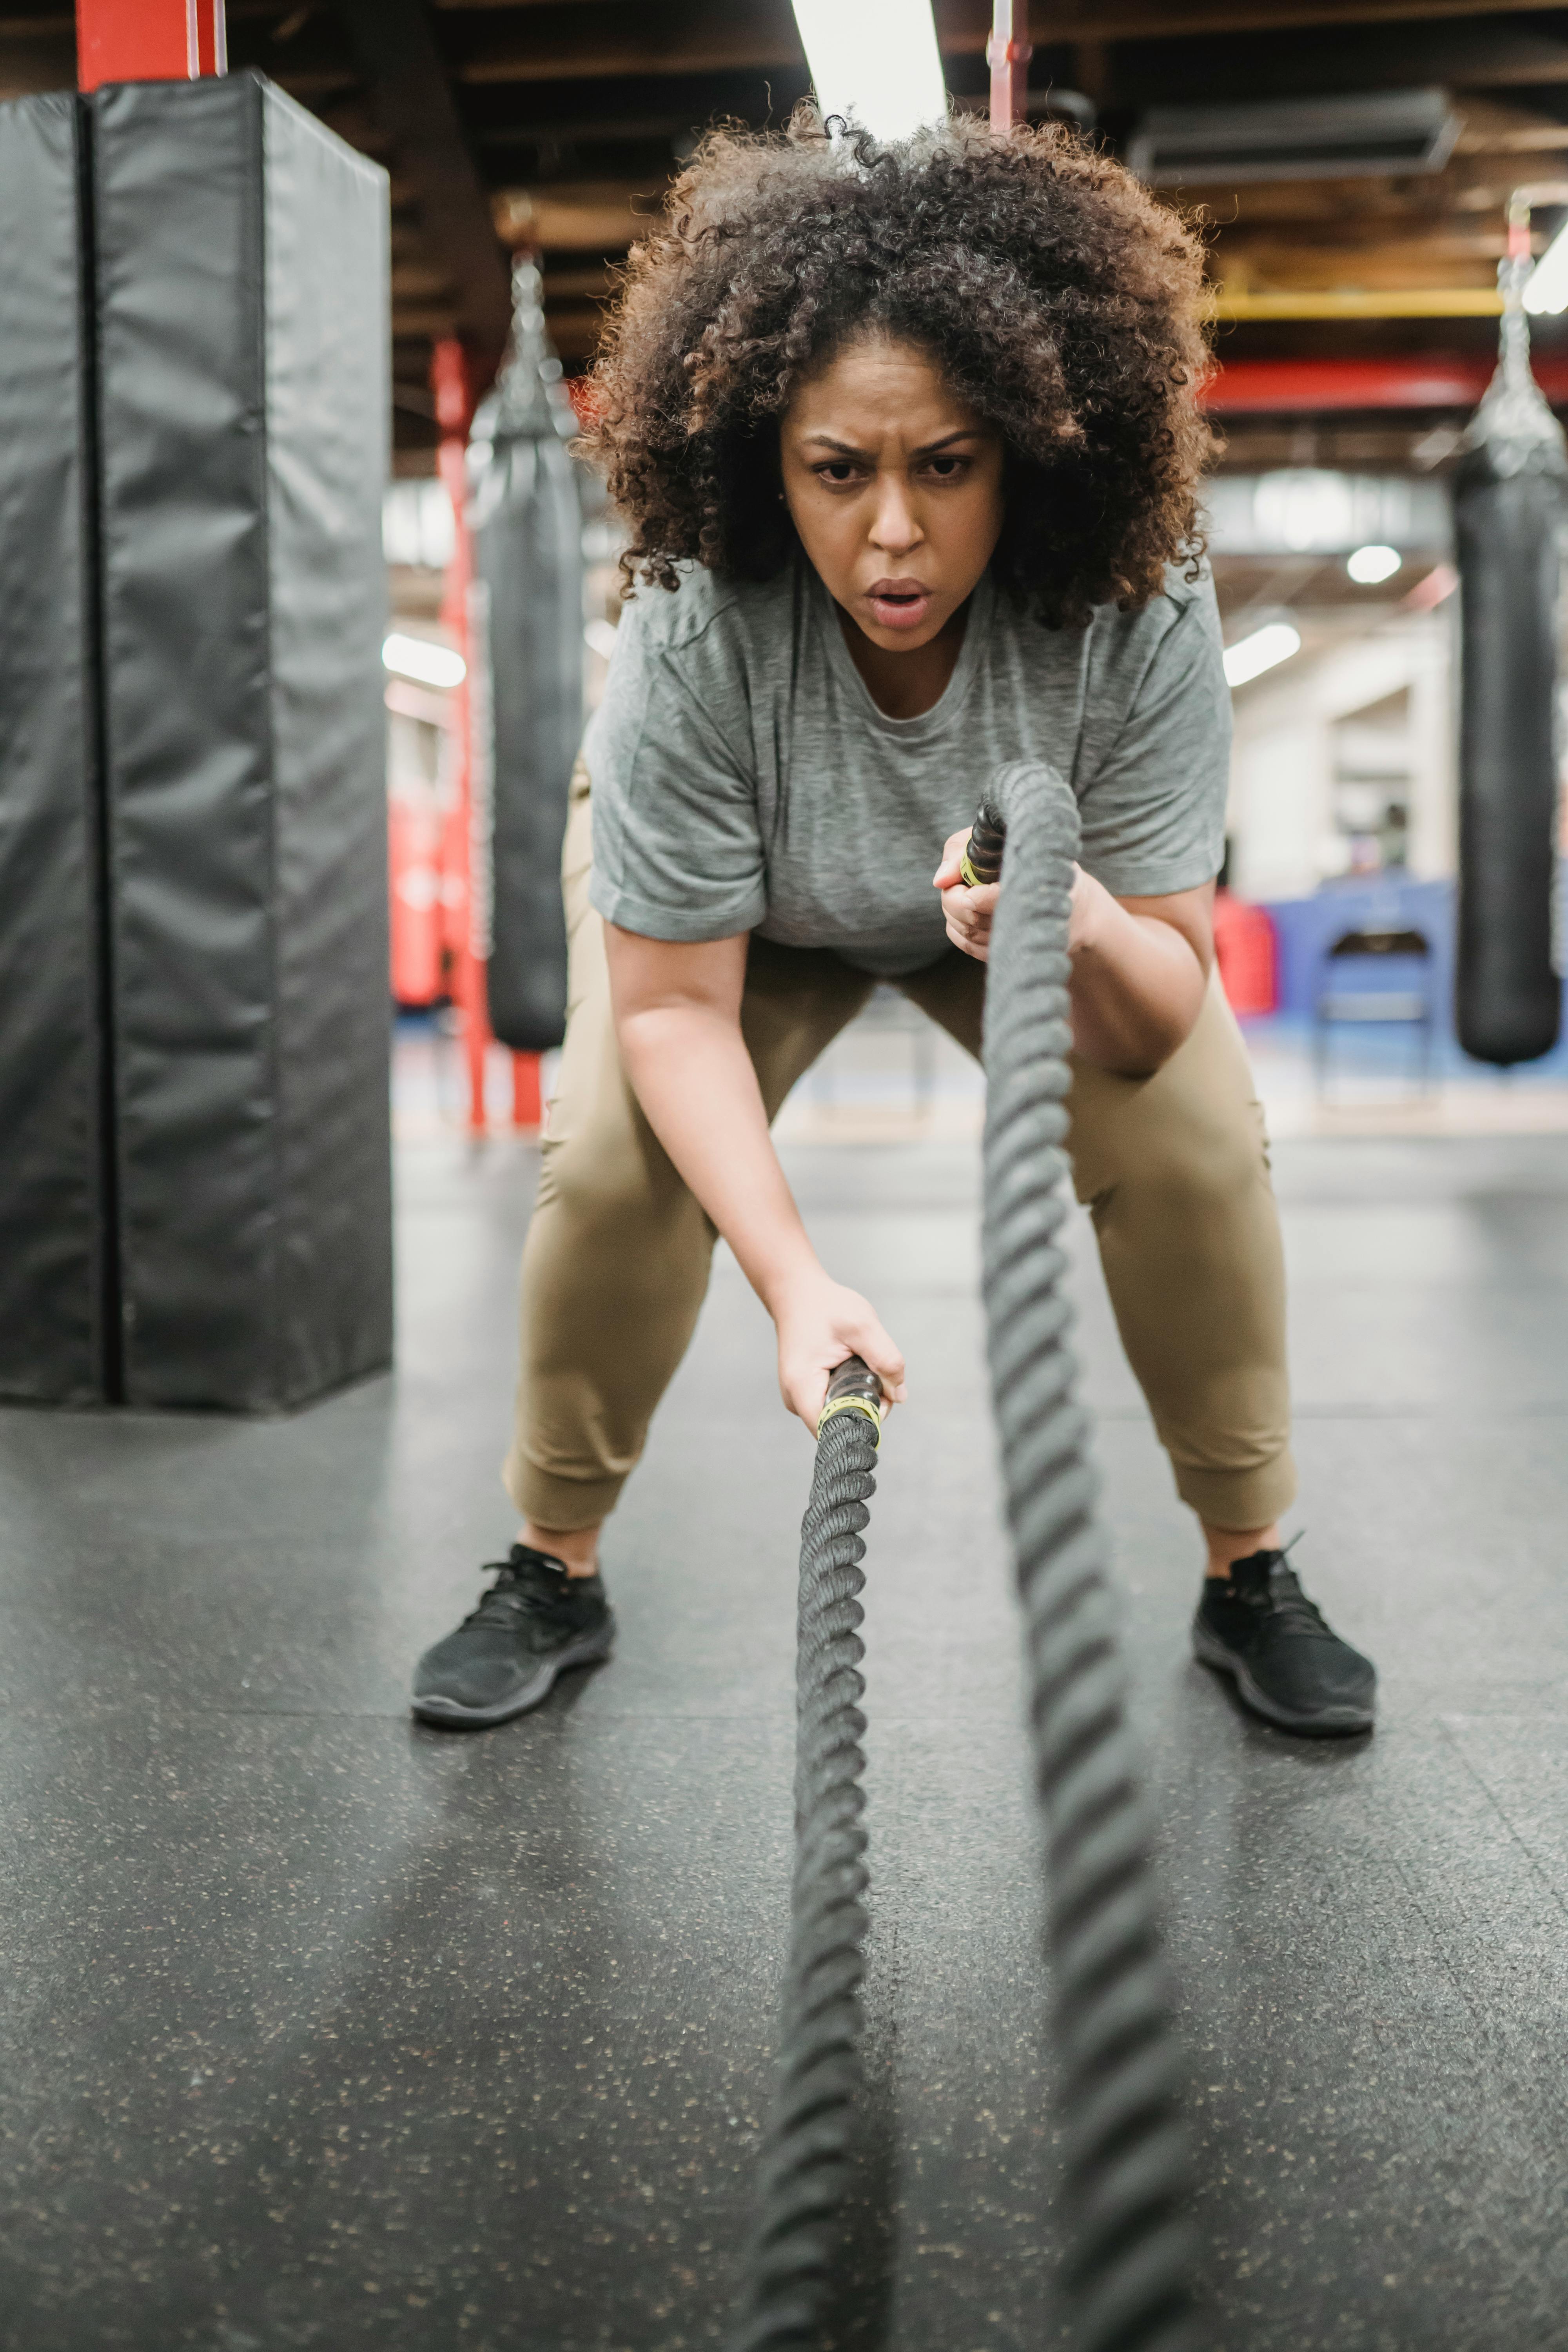 strong obese black woman exercising with heavy ropes in gym